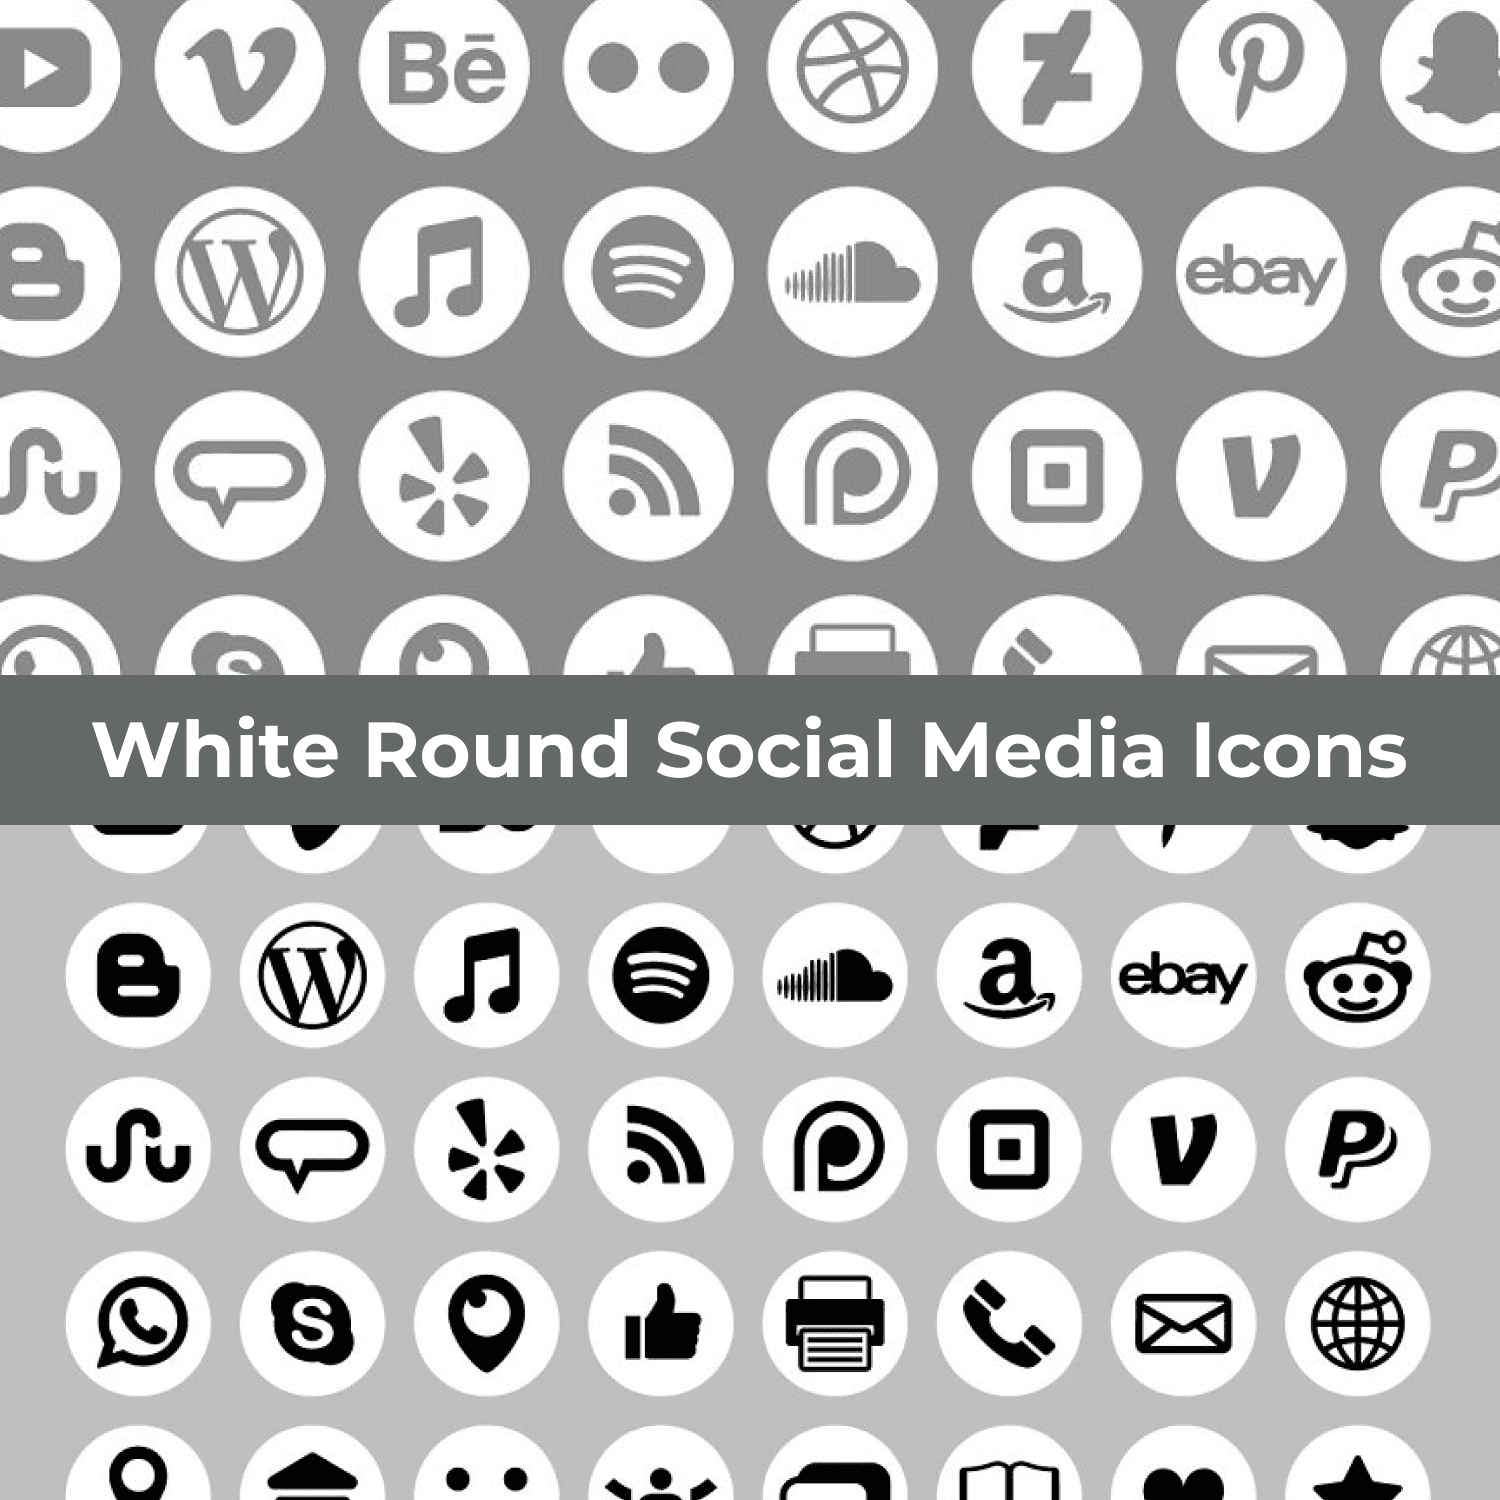 White Round Social Media Icons cover image.